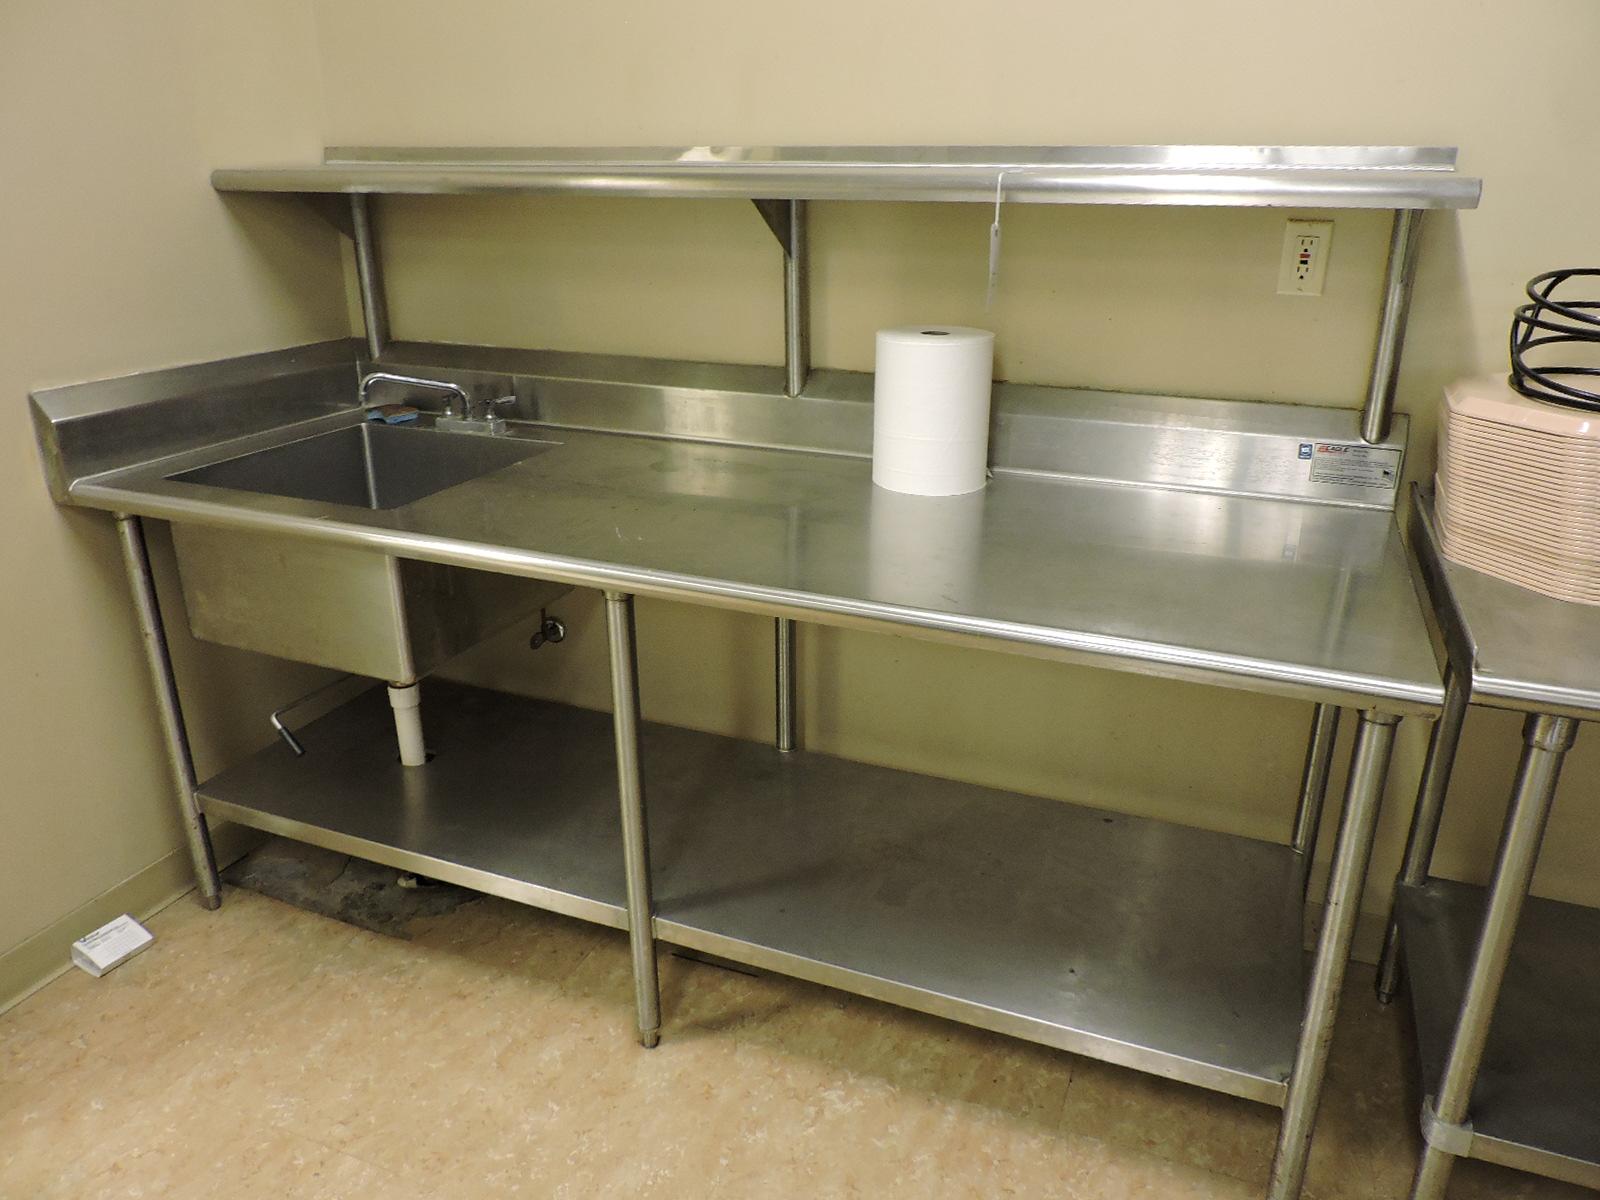 EAGLE Brand 3-Level Stainless Steel PREP TABLE WITH BUILT-IN SINK